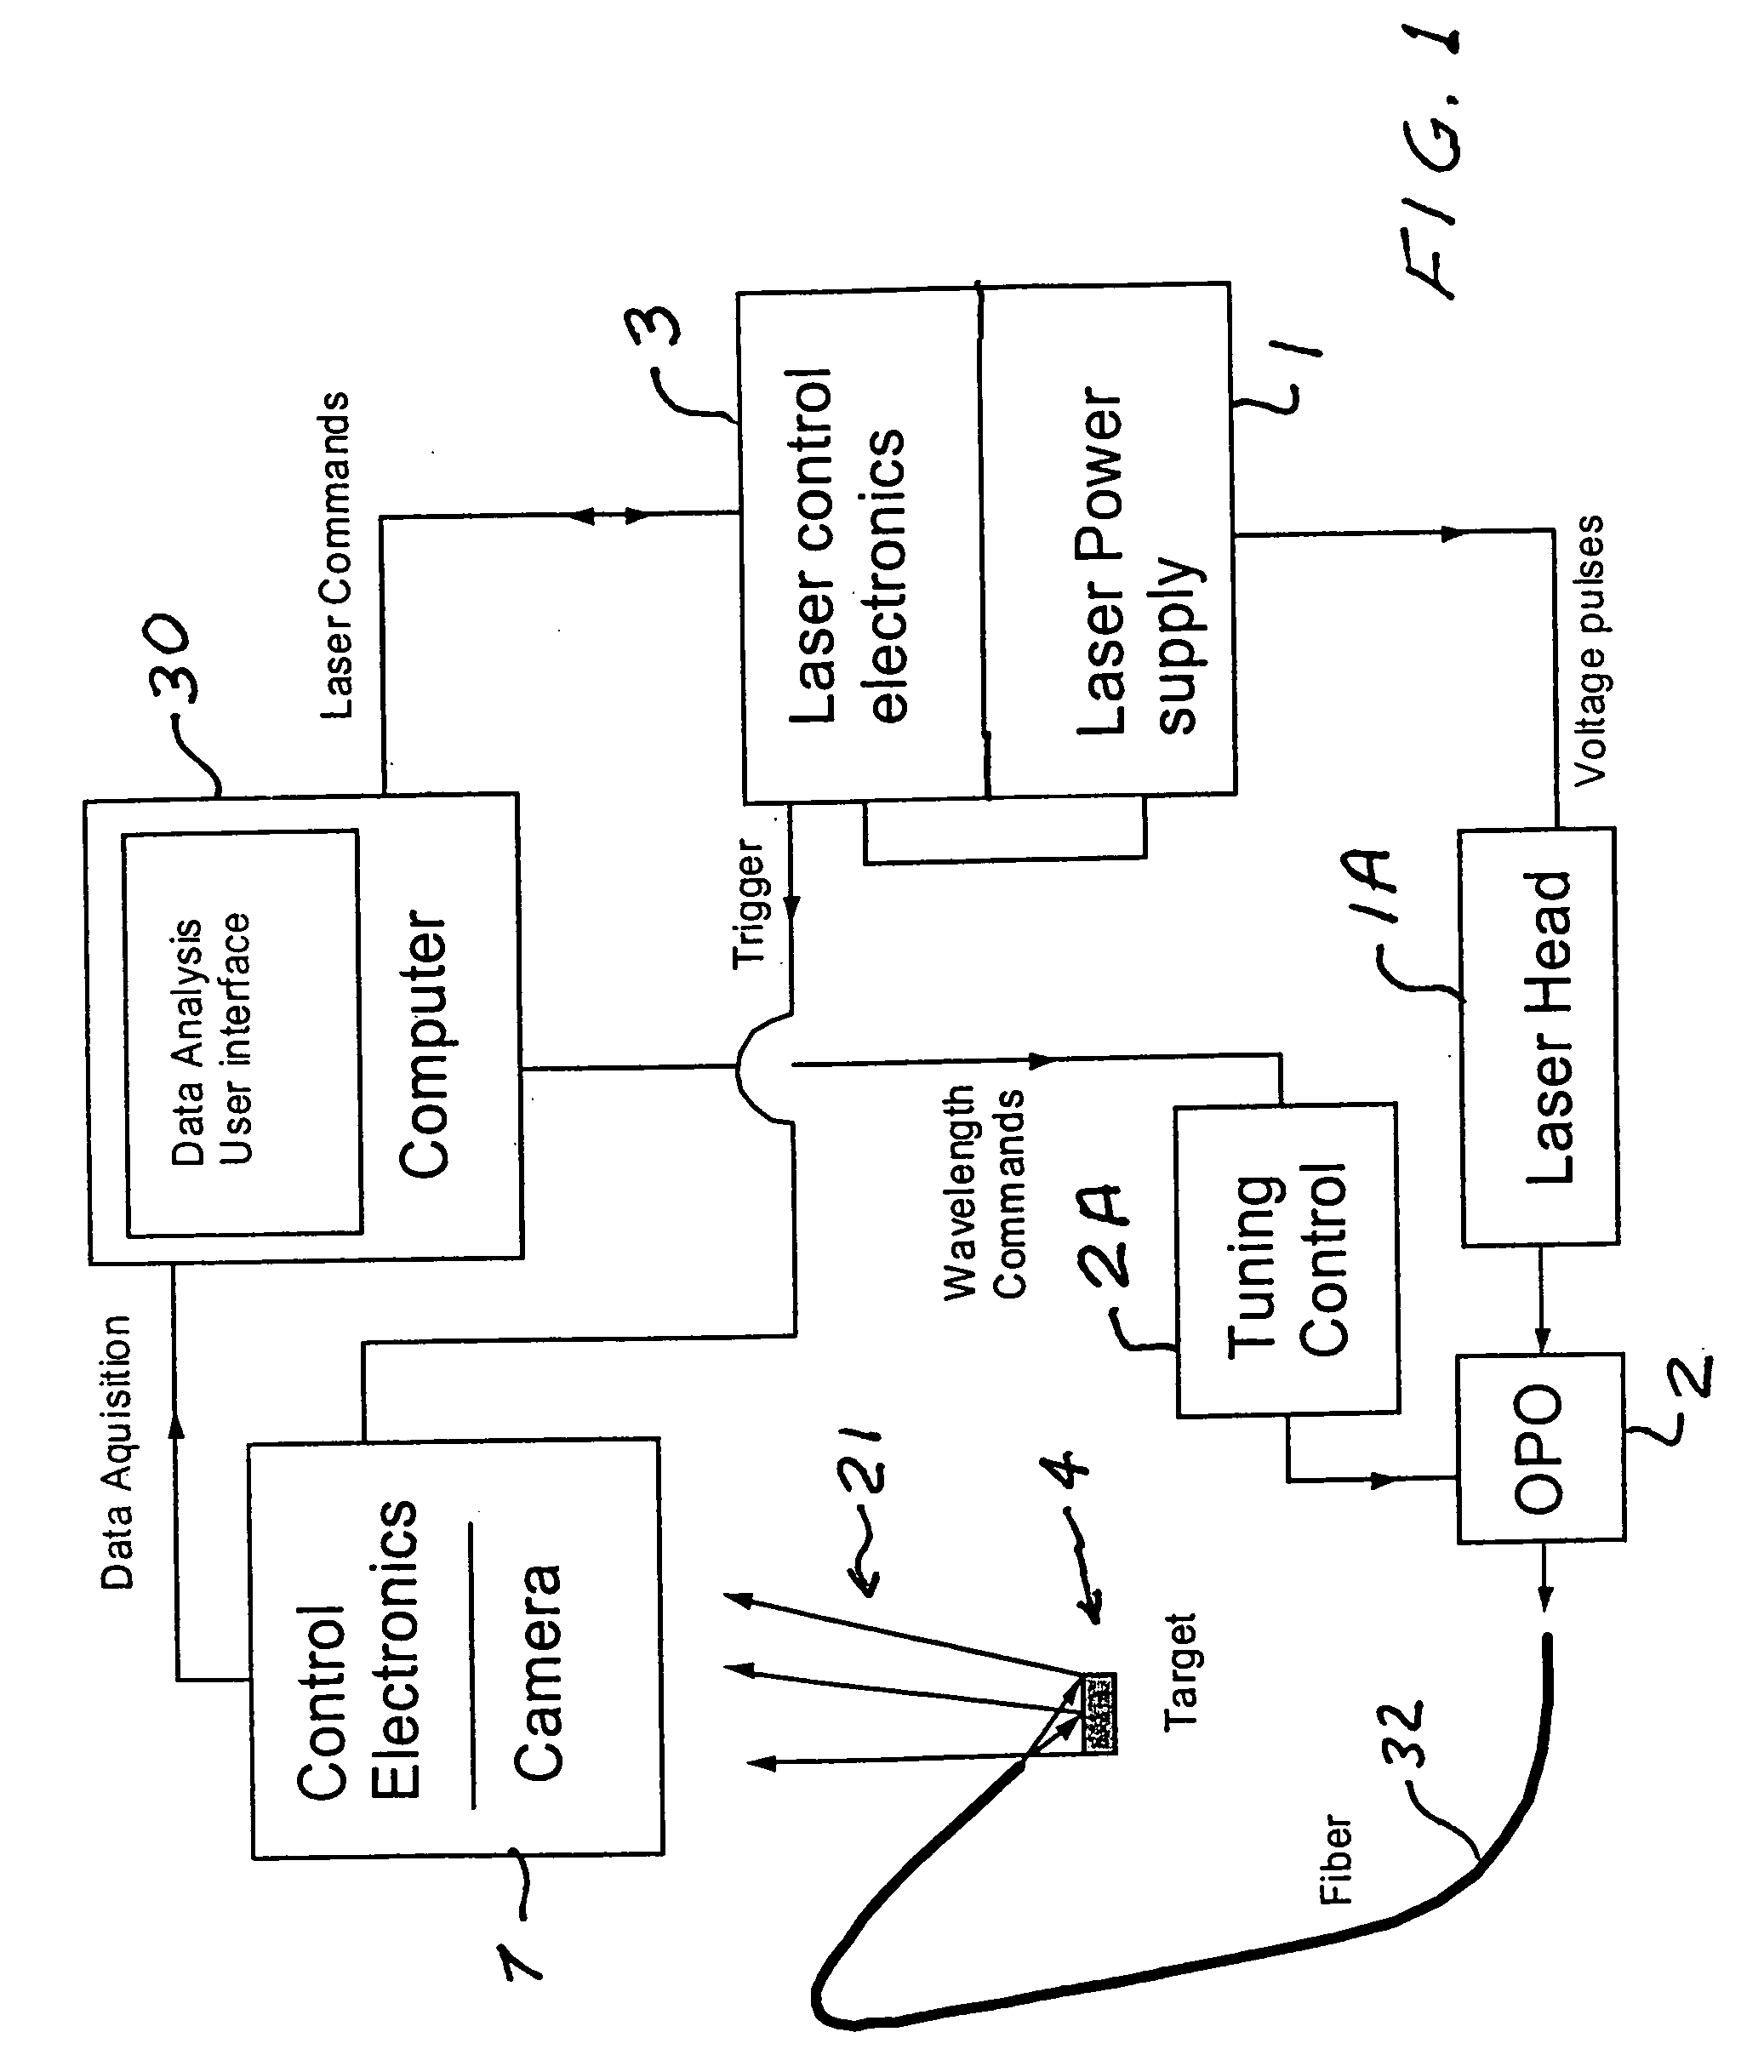 Spectral imaging device with tunable light source